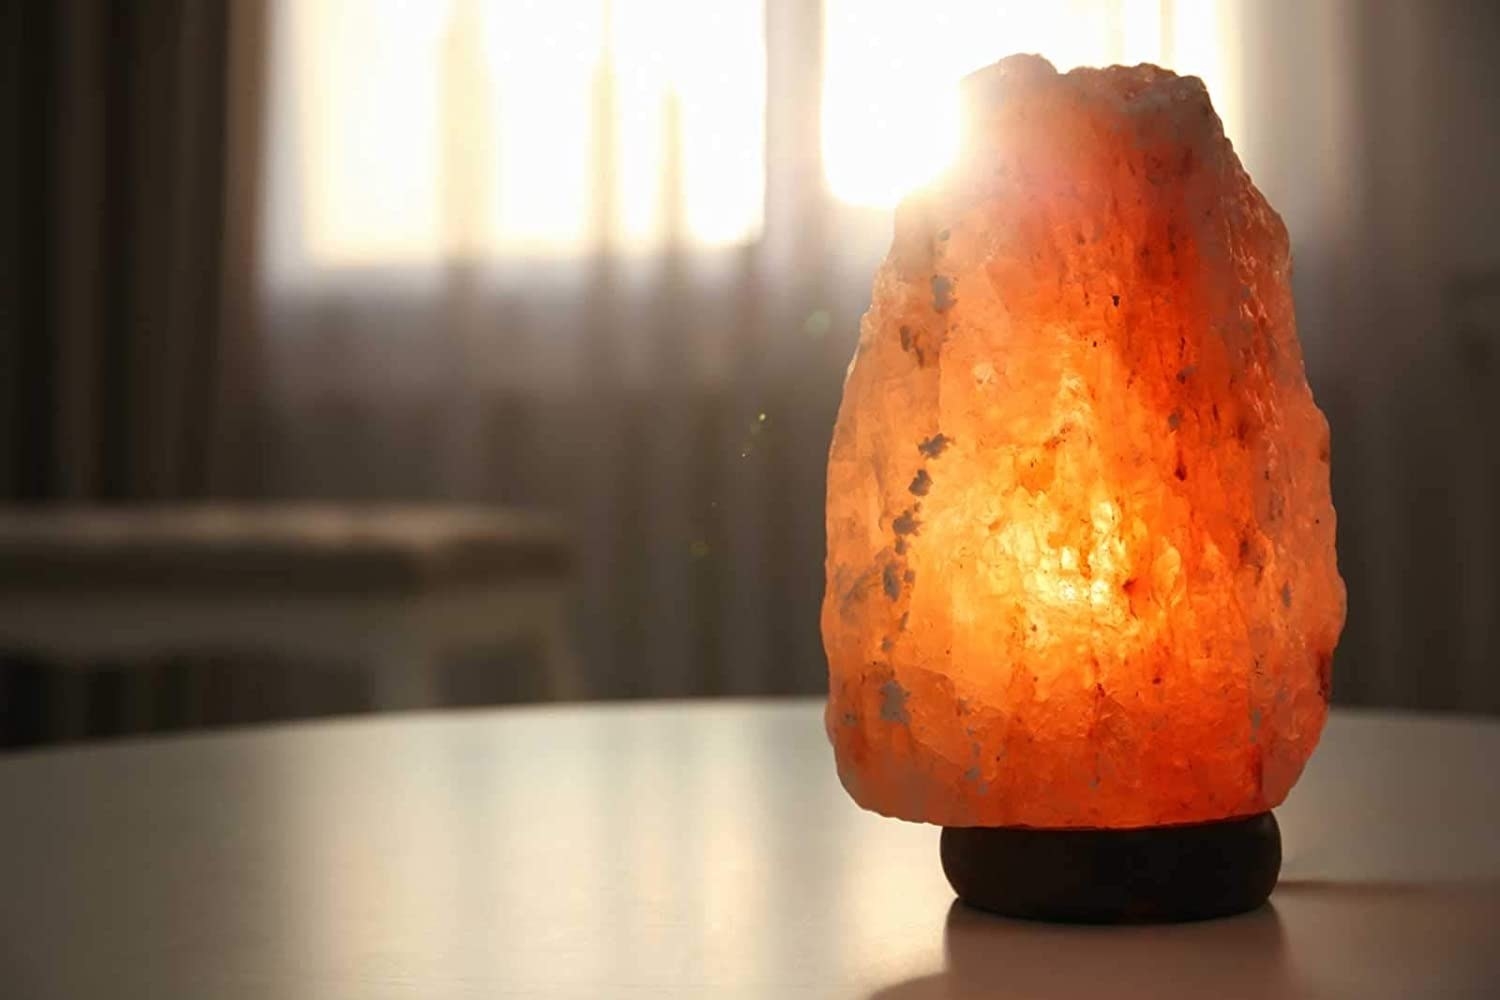 A Himalayan Rock salt lamp on a table with sunlight peeking through the curtains in the background.